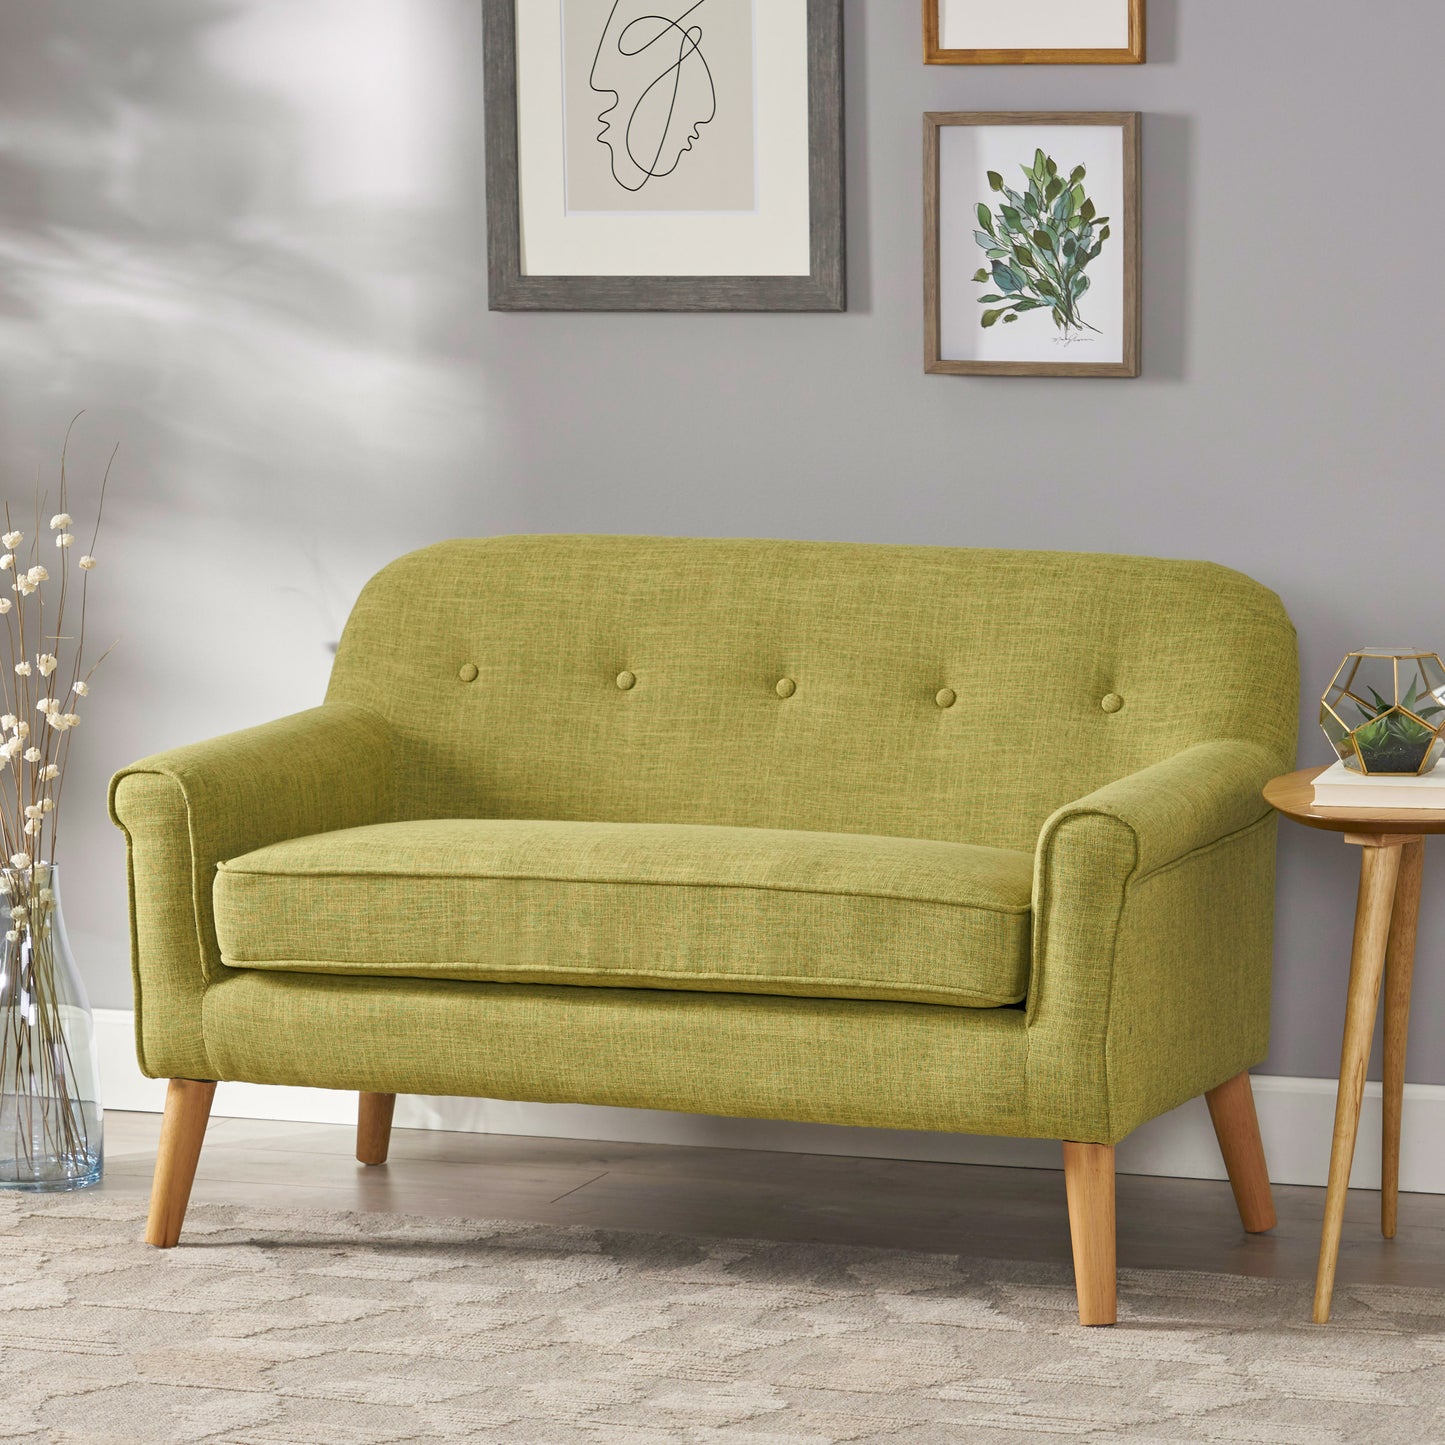 Mia Mid-Century Modern Button Tufted Fabric Upholstered Loveseat w/ Tapered Legs